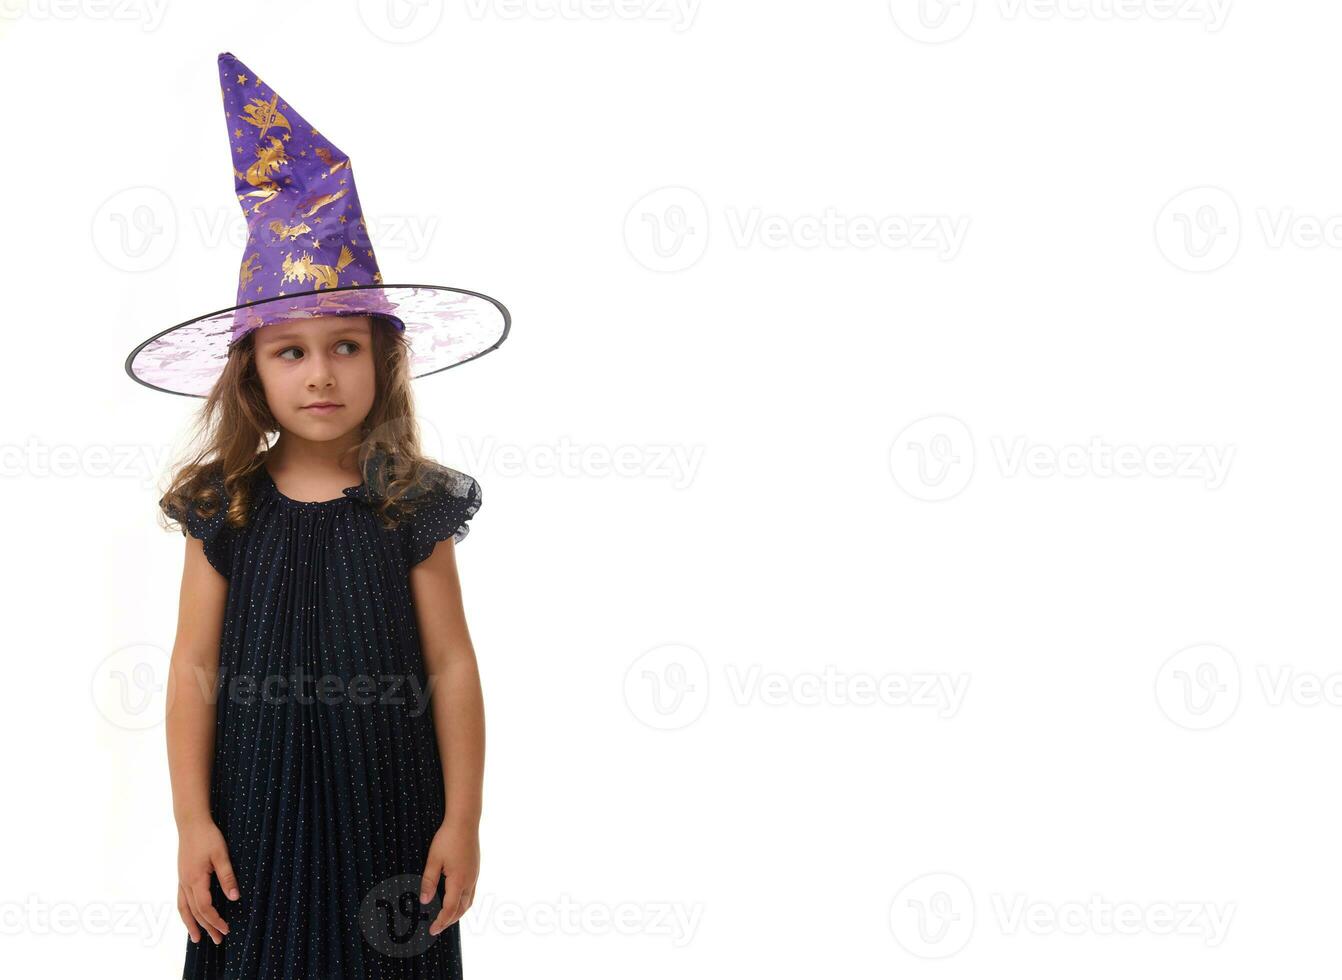 Portrait of pretty little girl wearing a wizard hat and dressed in stylish carnival dress, looking at camera posing with crossed arms against white background, copy space. Halloween concept photo